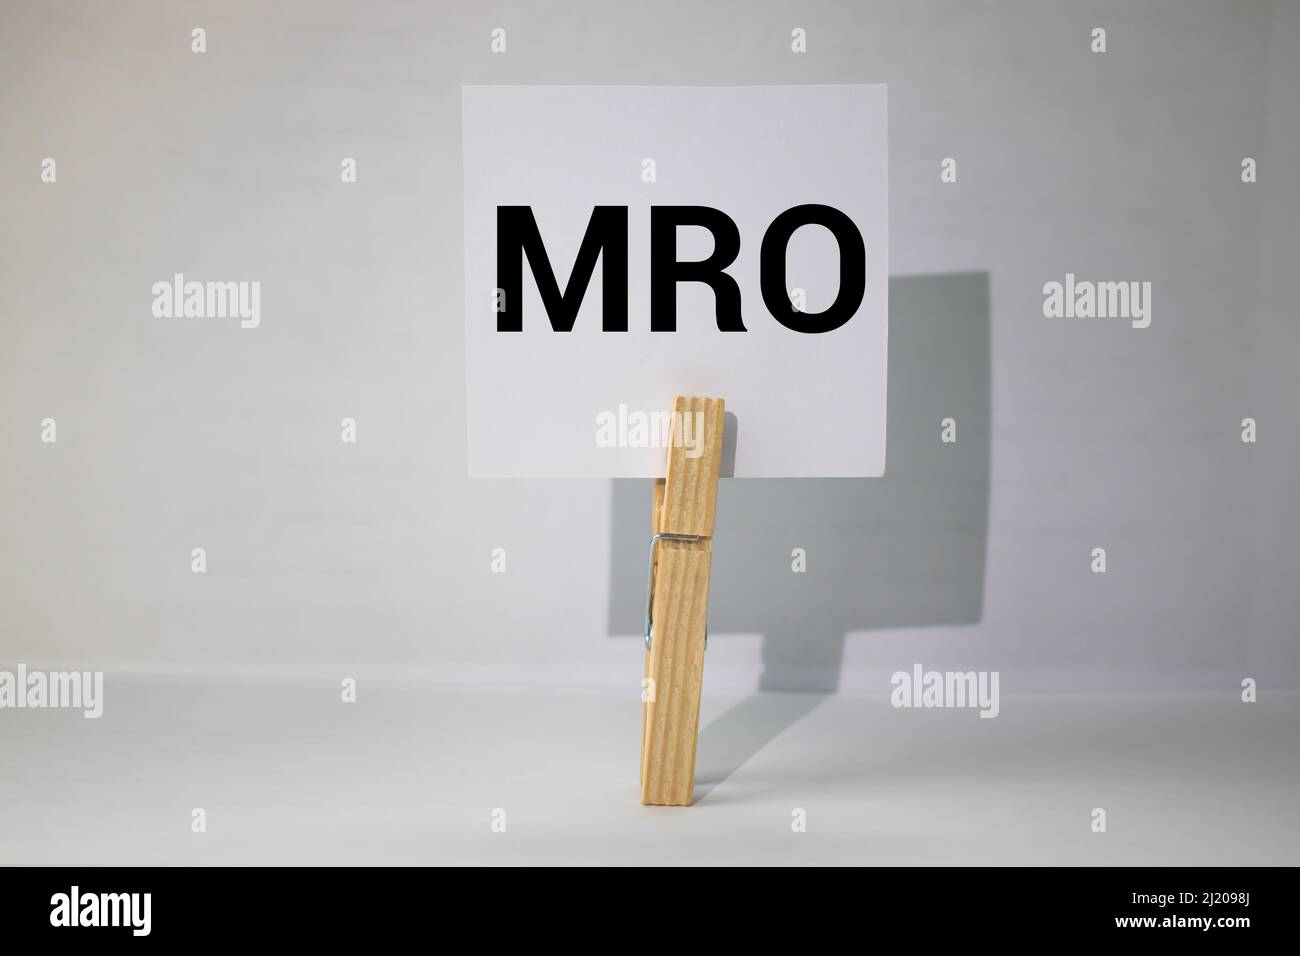 MRO - Maintenance, Repair, and Operations acronym, business concept background Stock Photo